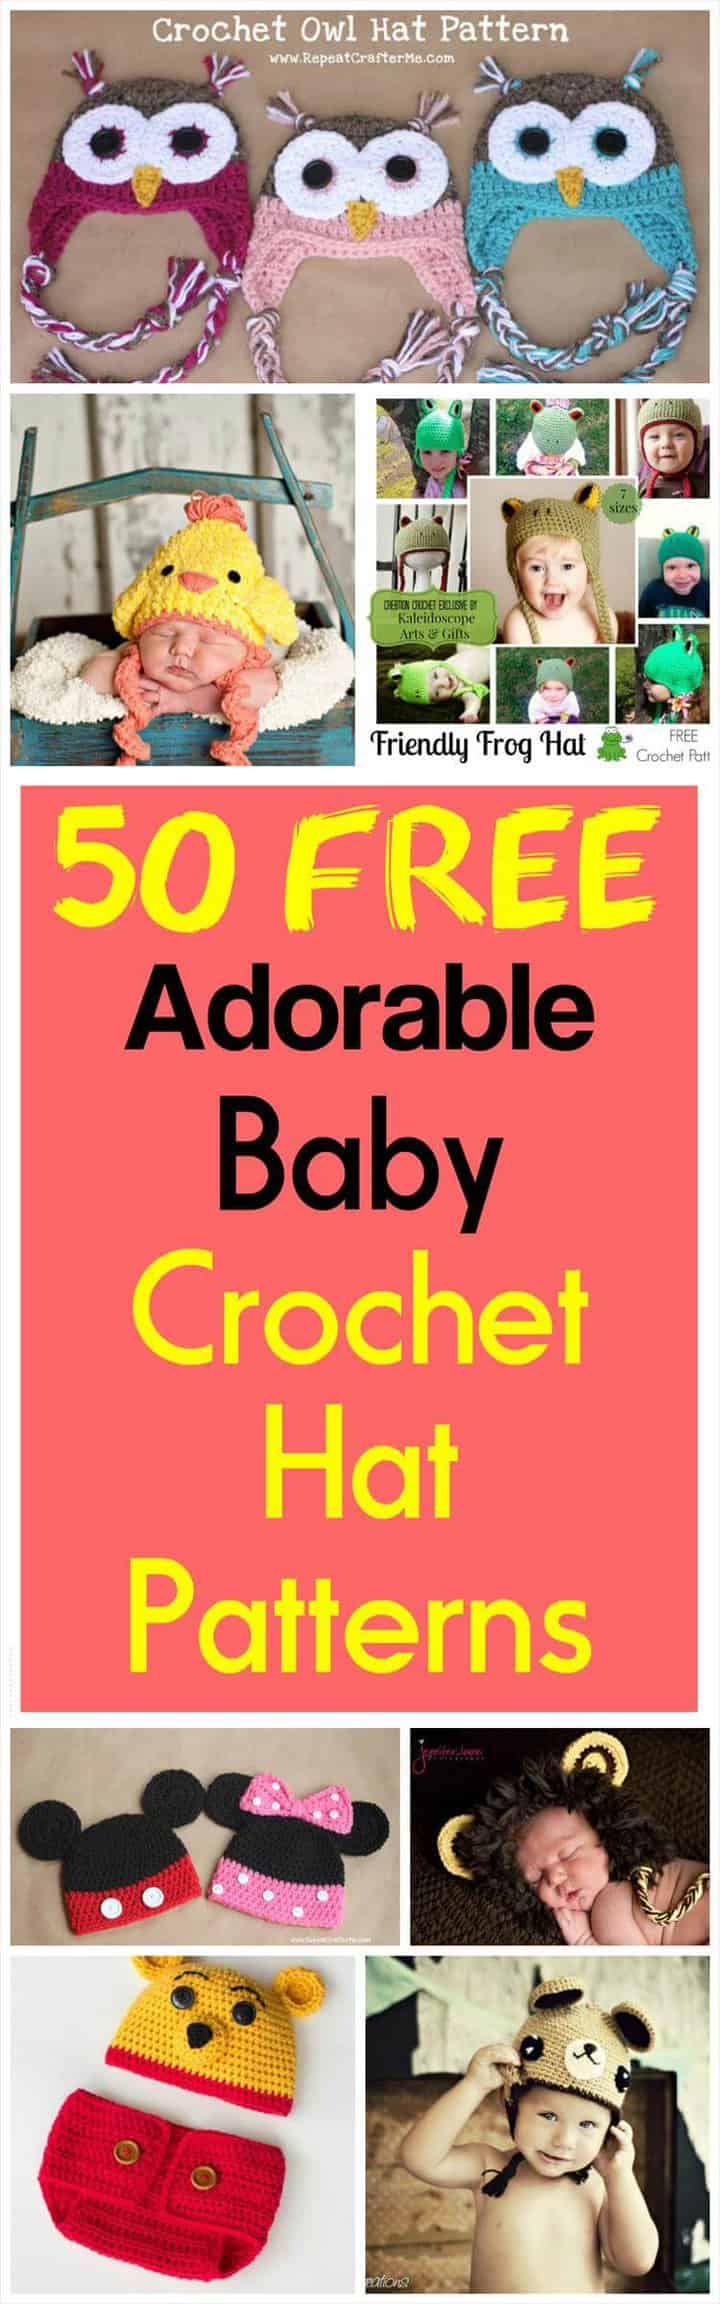 50-Free-Adorable-Baby-Crochet-Hat-Patterns